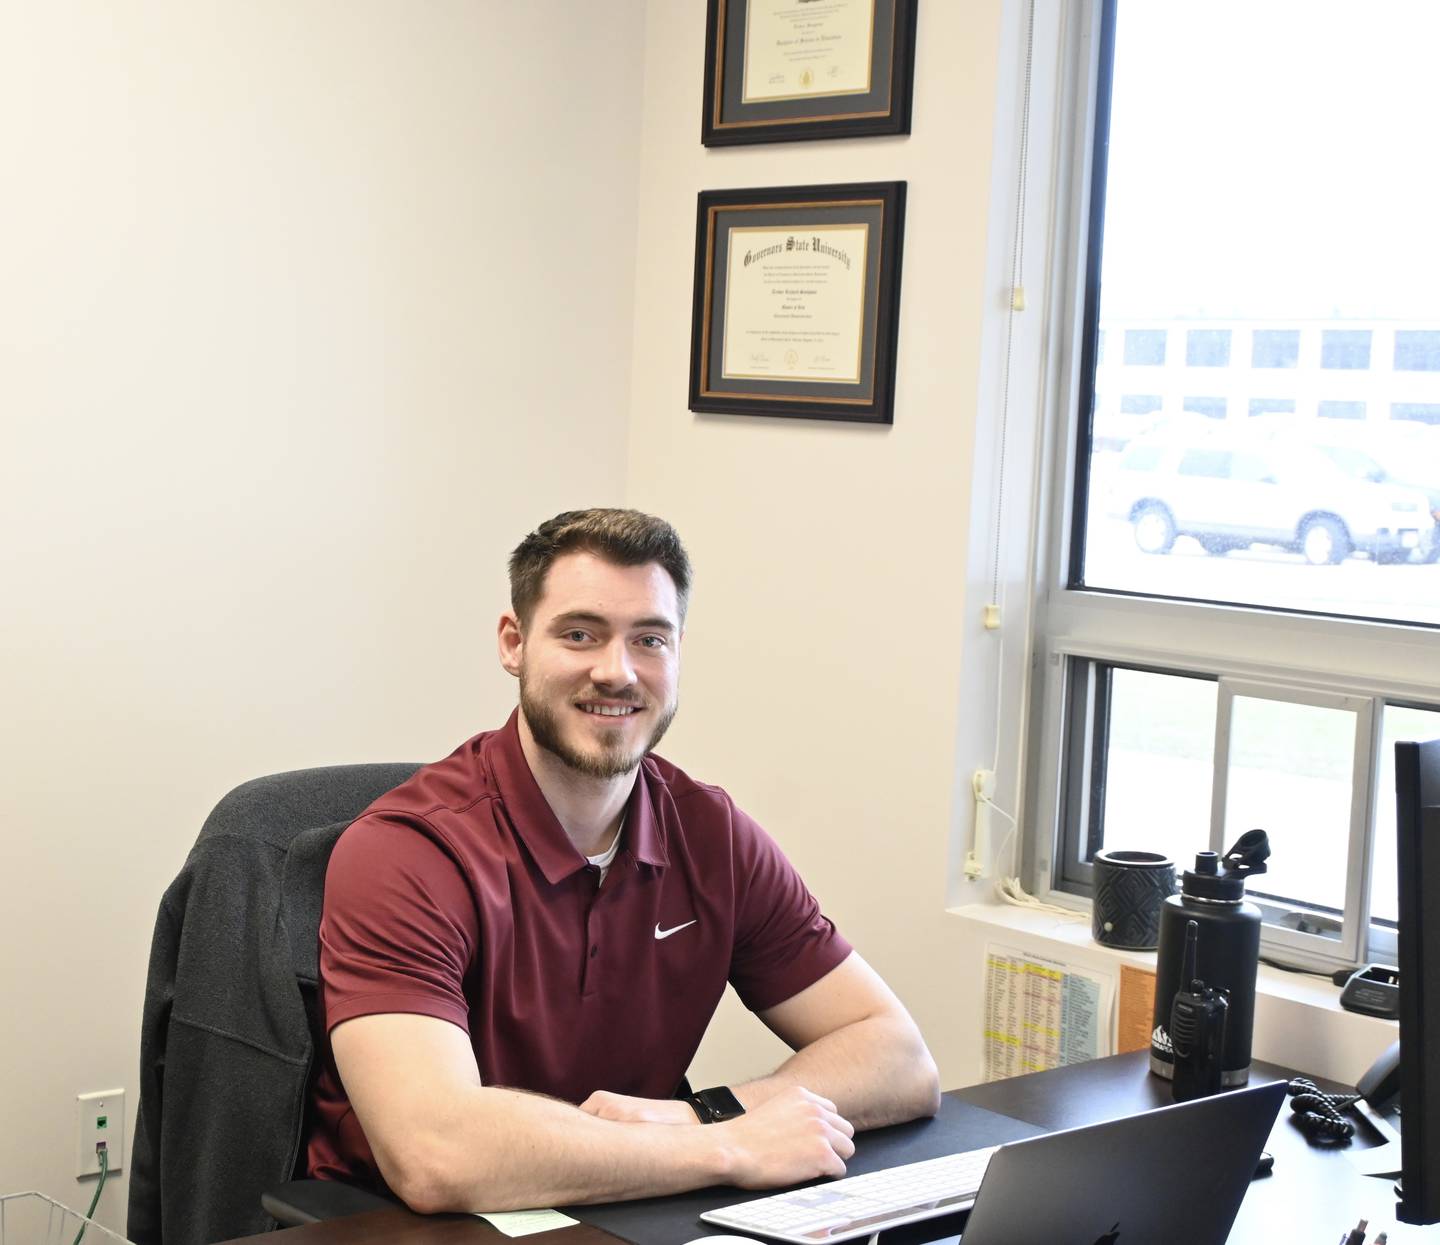 Sampson began his administration career at the Grundy Area Vocational Center last year as the Dean of Students and has already begun making an impact.